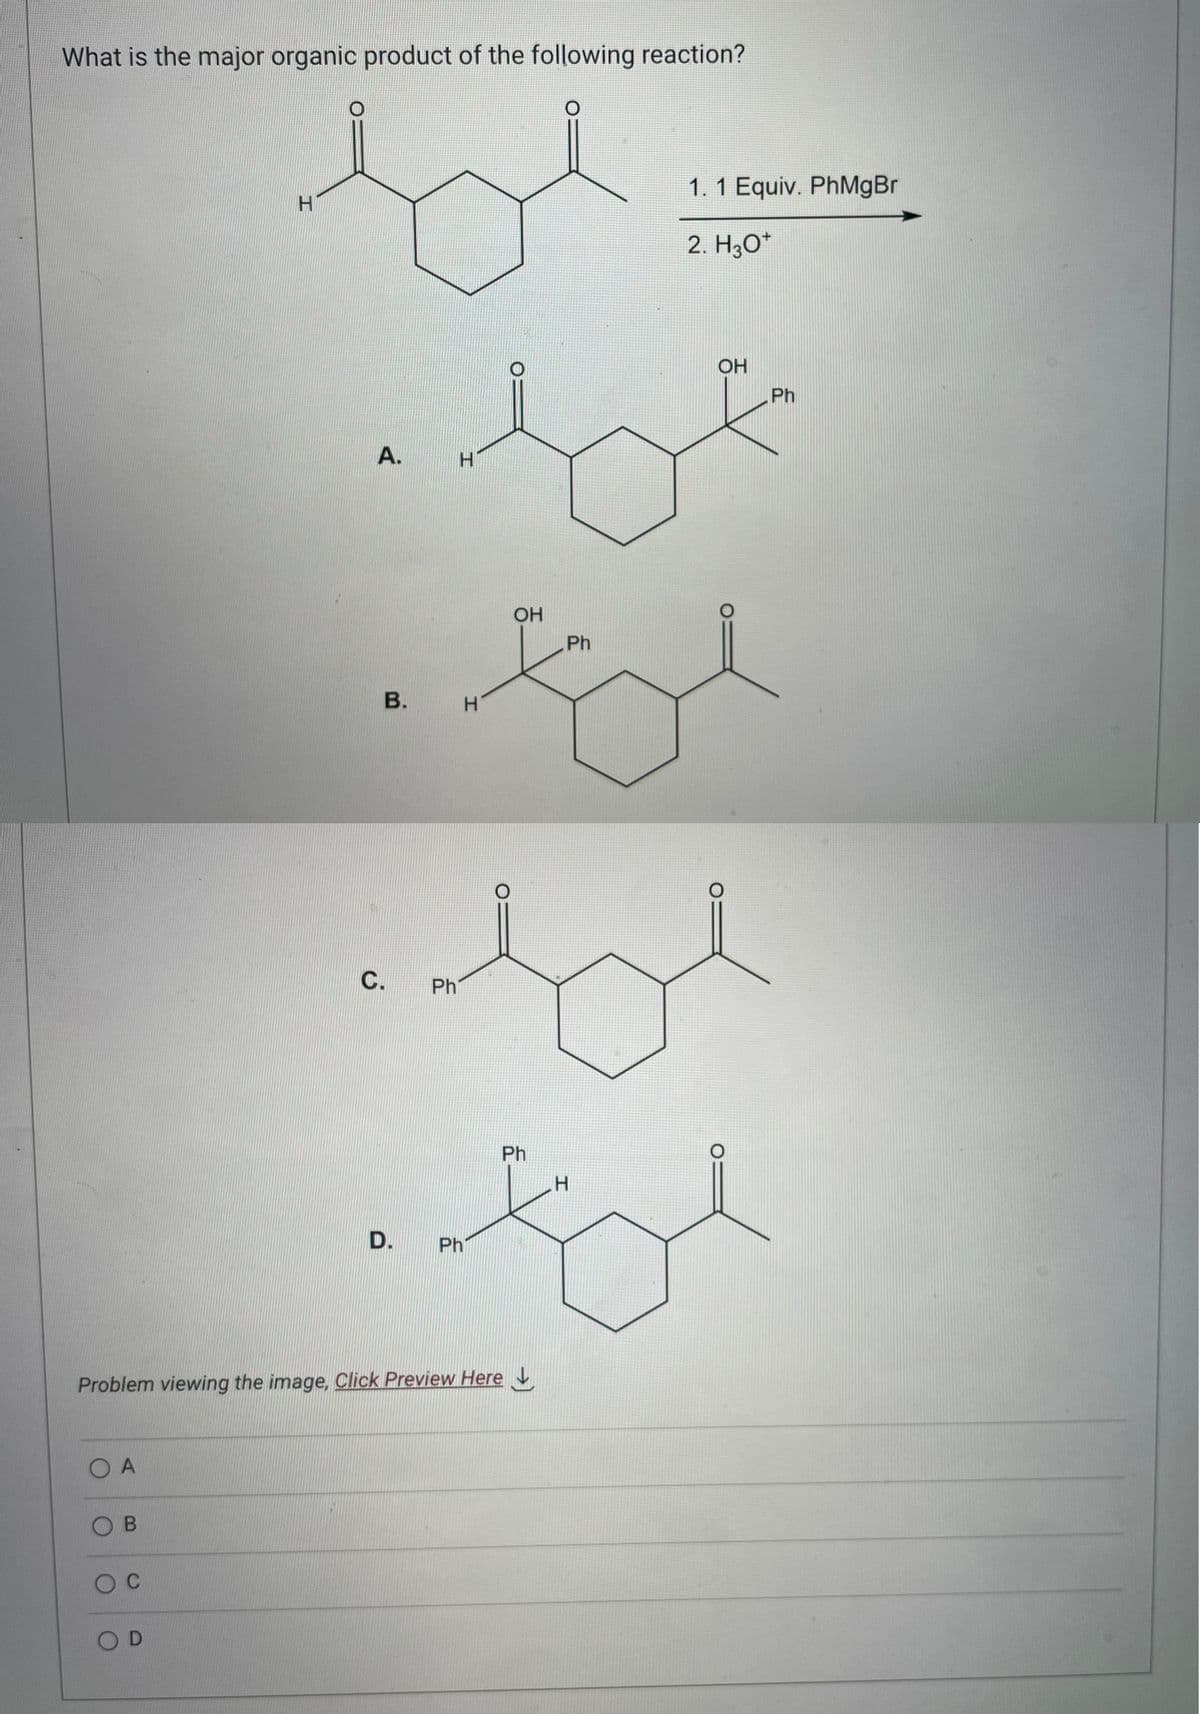 What is the major organic product of the following reaction?
be
OA
OB
O C
H
OD
A.
B.
H
H
Problem viewing the image. Click Preview Here
D. Ph
OH
Ph
idyl
C. Ph
Ph
1. 1 Equiv. PhMgBr
2. H3O+
لد
OH
H
Ph